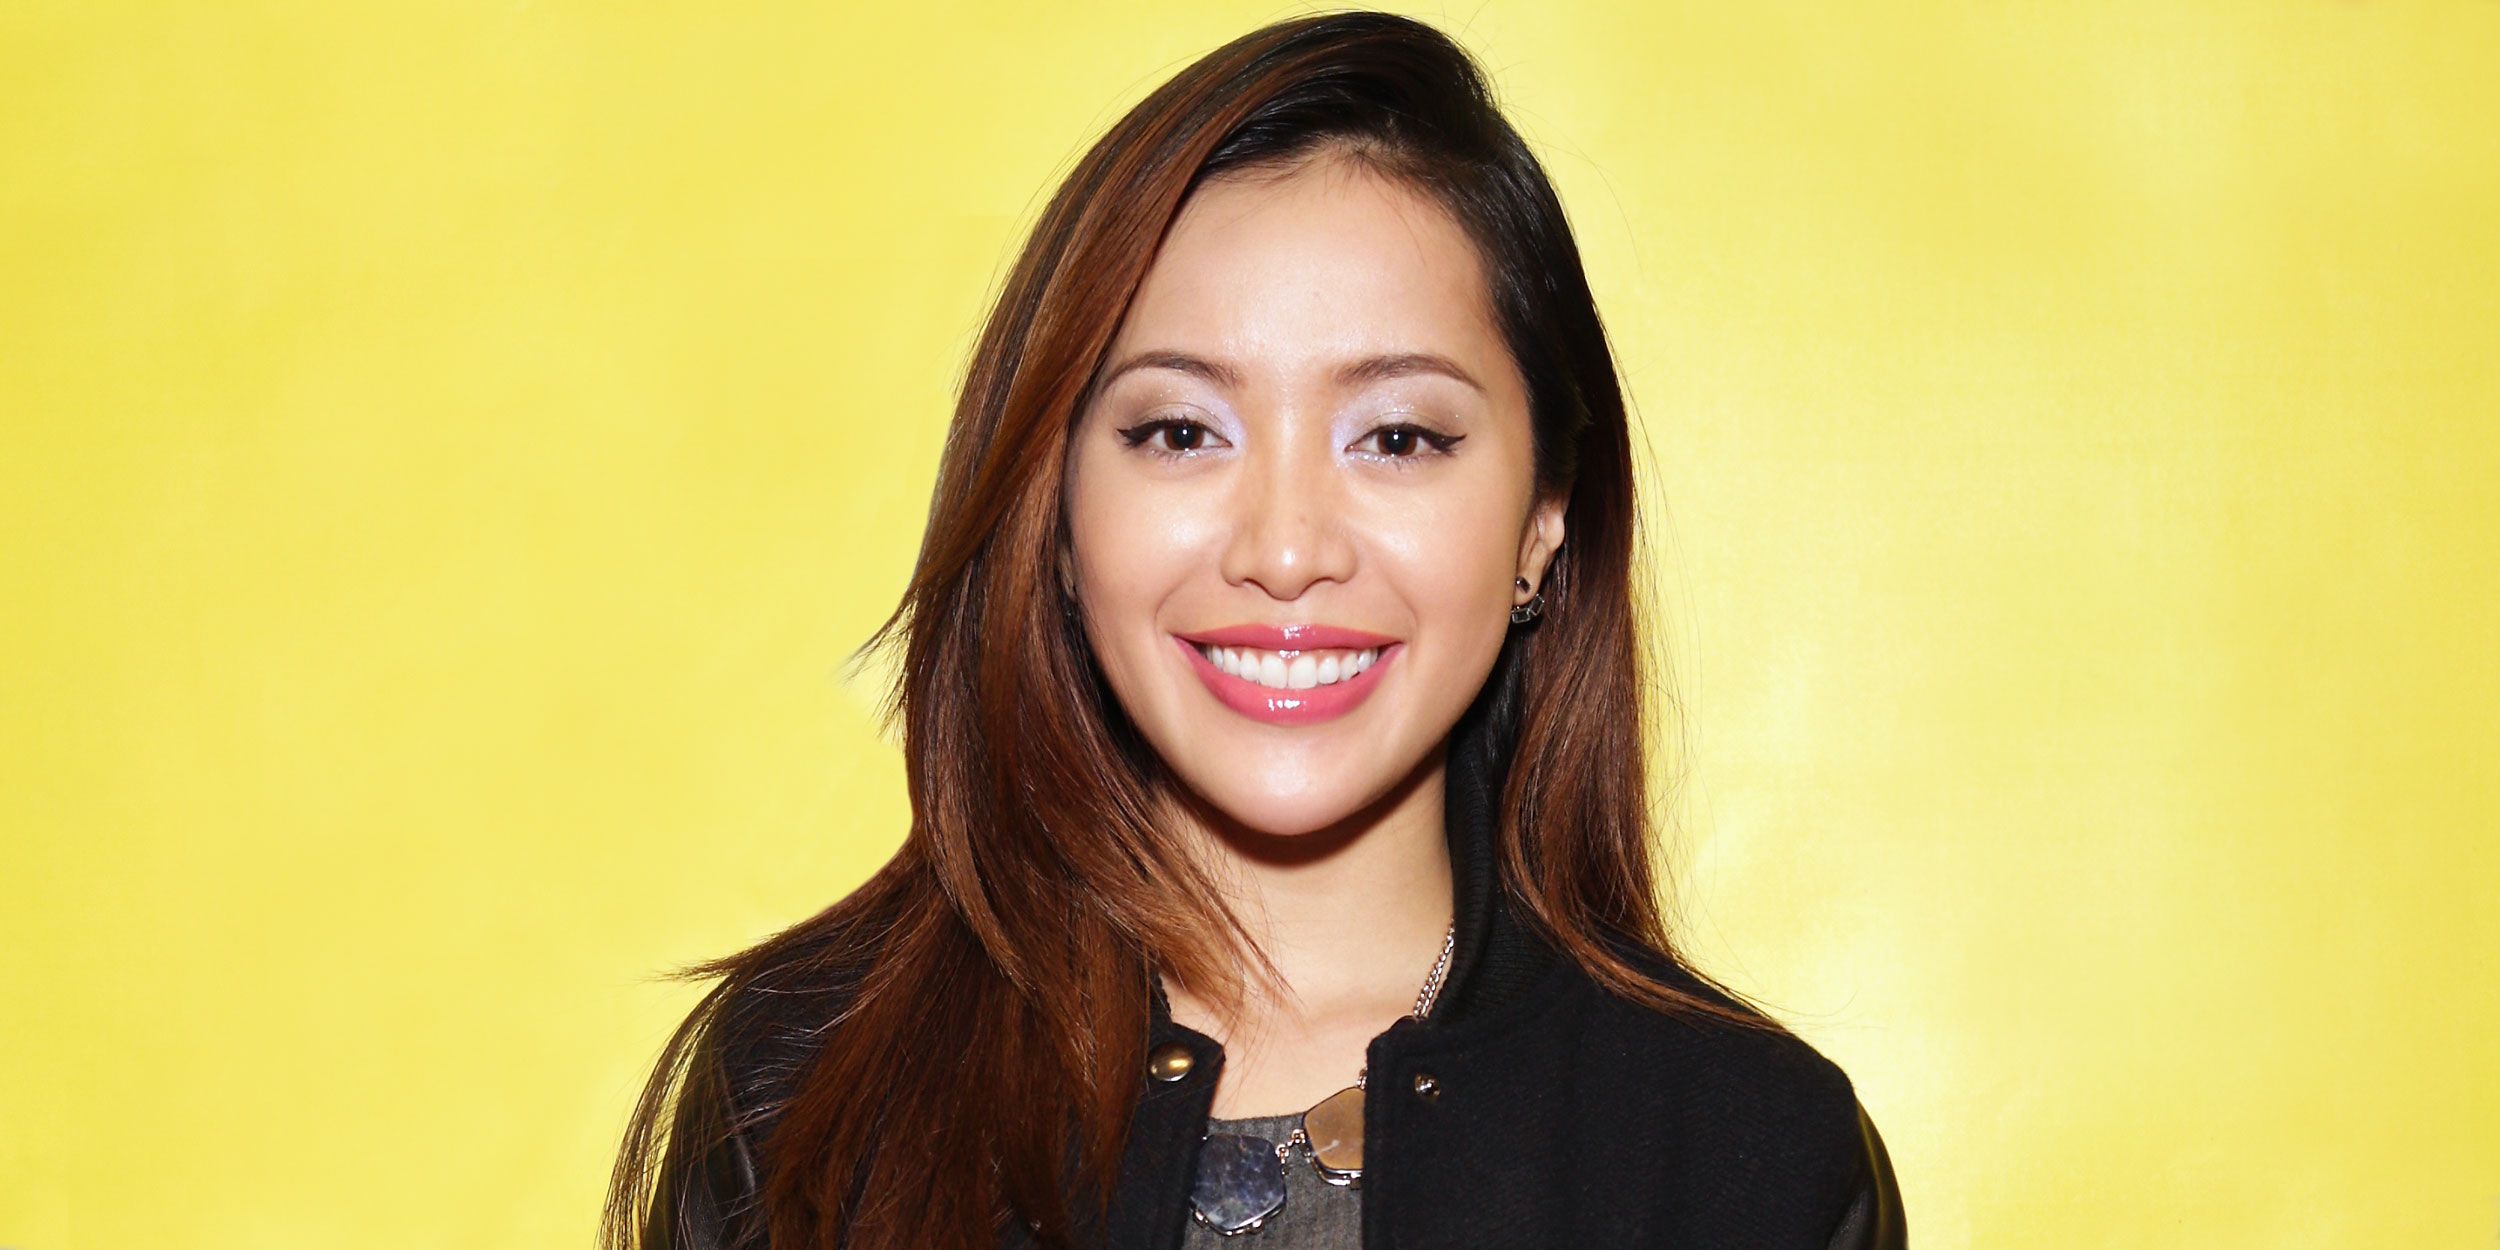  Million People Have Watched Michelle Phan's Comeback Video